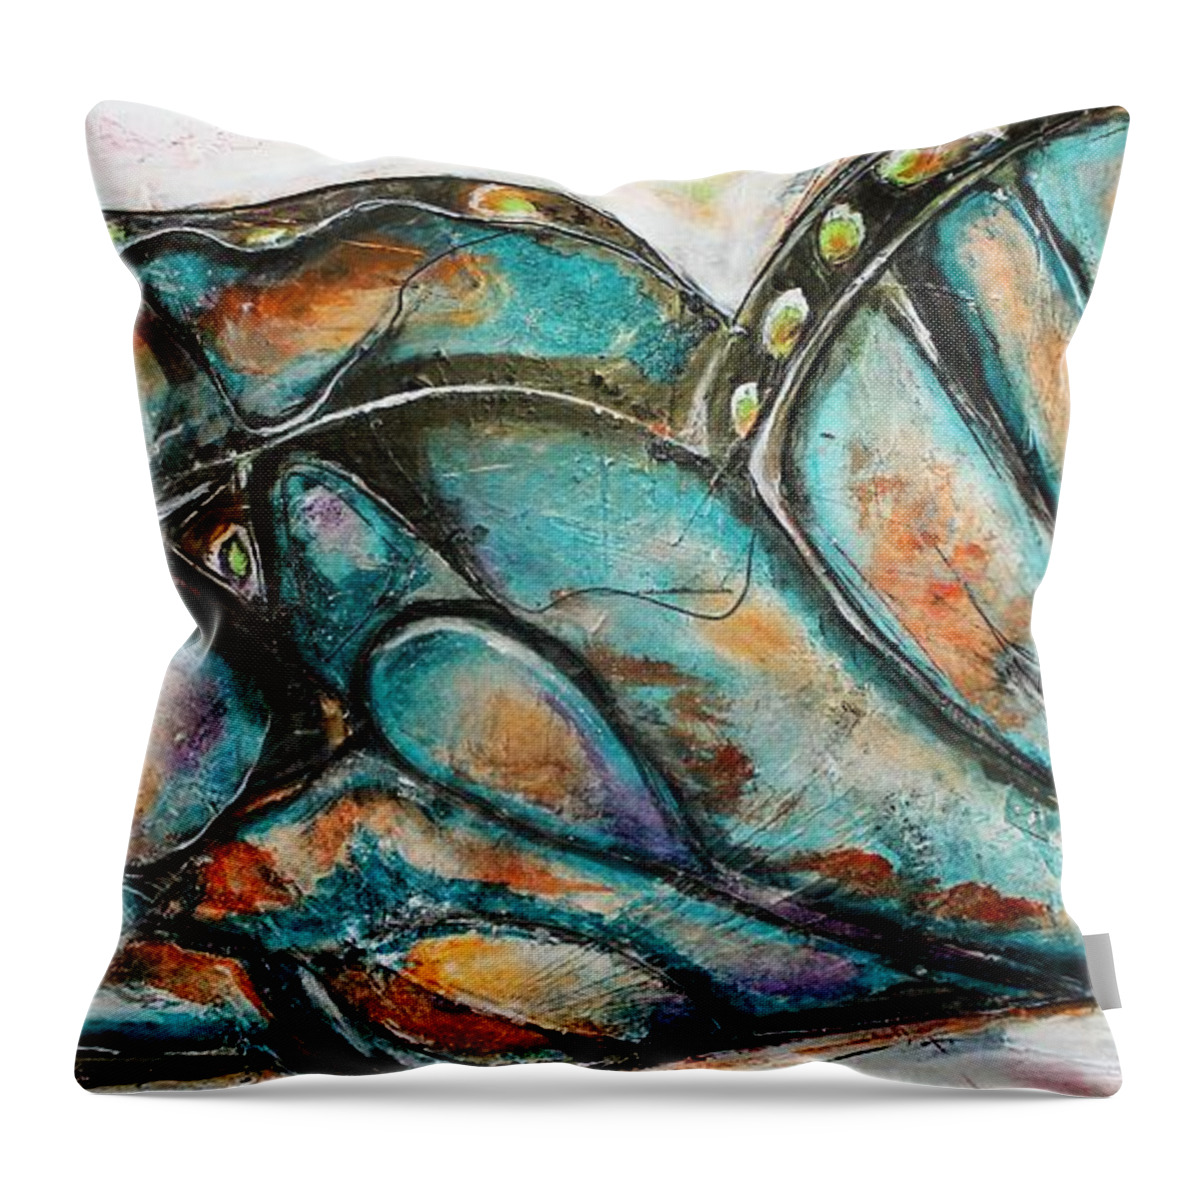 Butterfly Throw Pillow featuring the painting The Social Butterfly by Lucy Matta